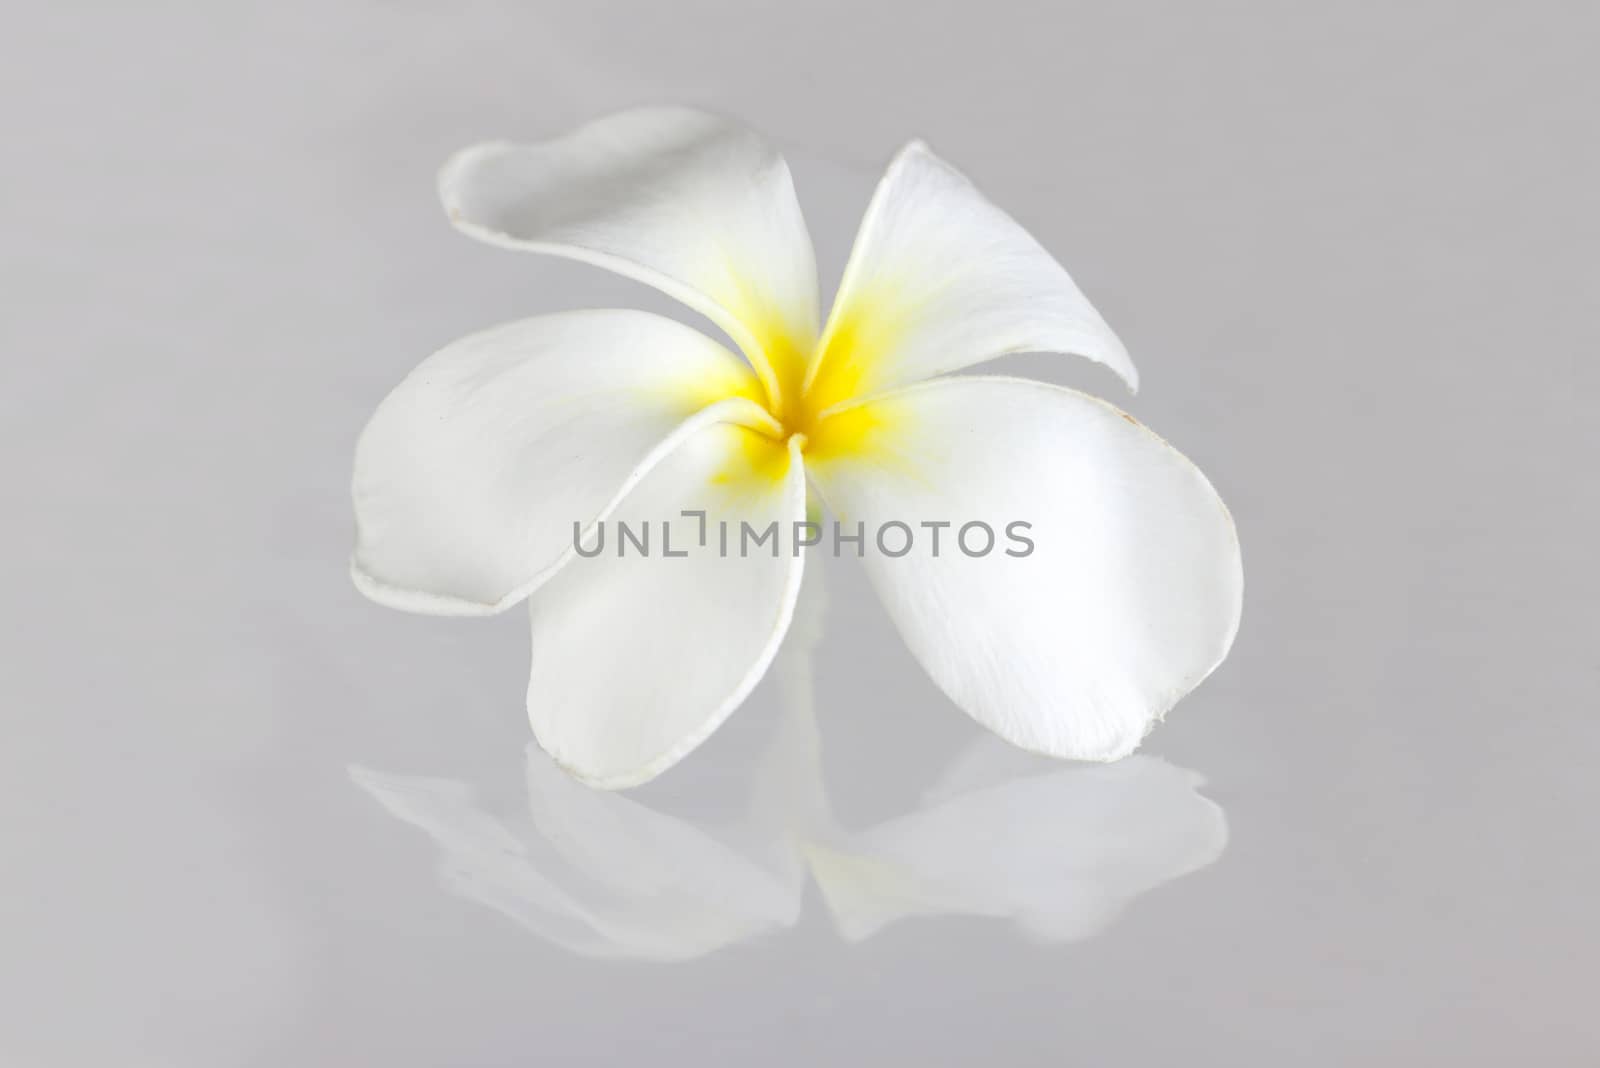 White Frangipani or Plumeria pudica with reflection on gray background.